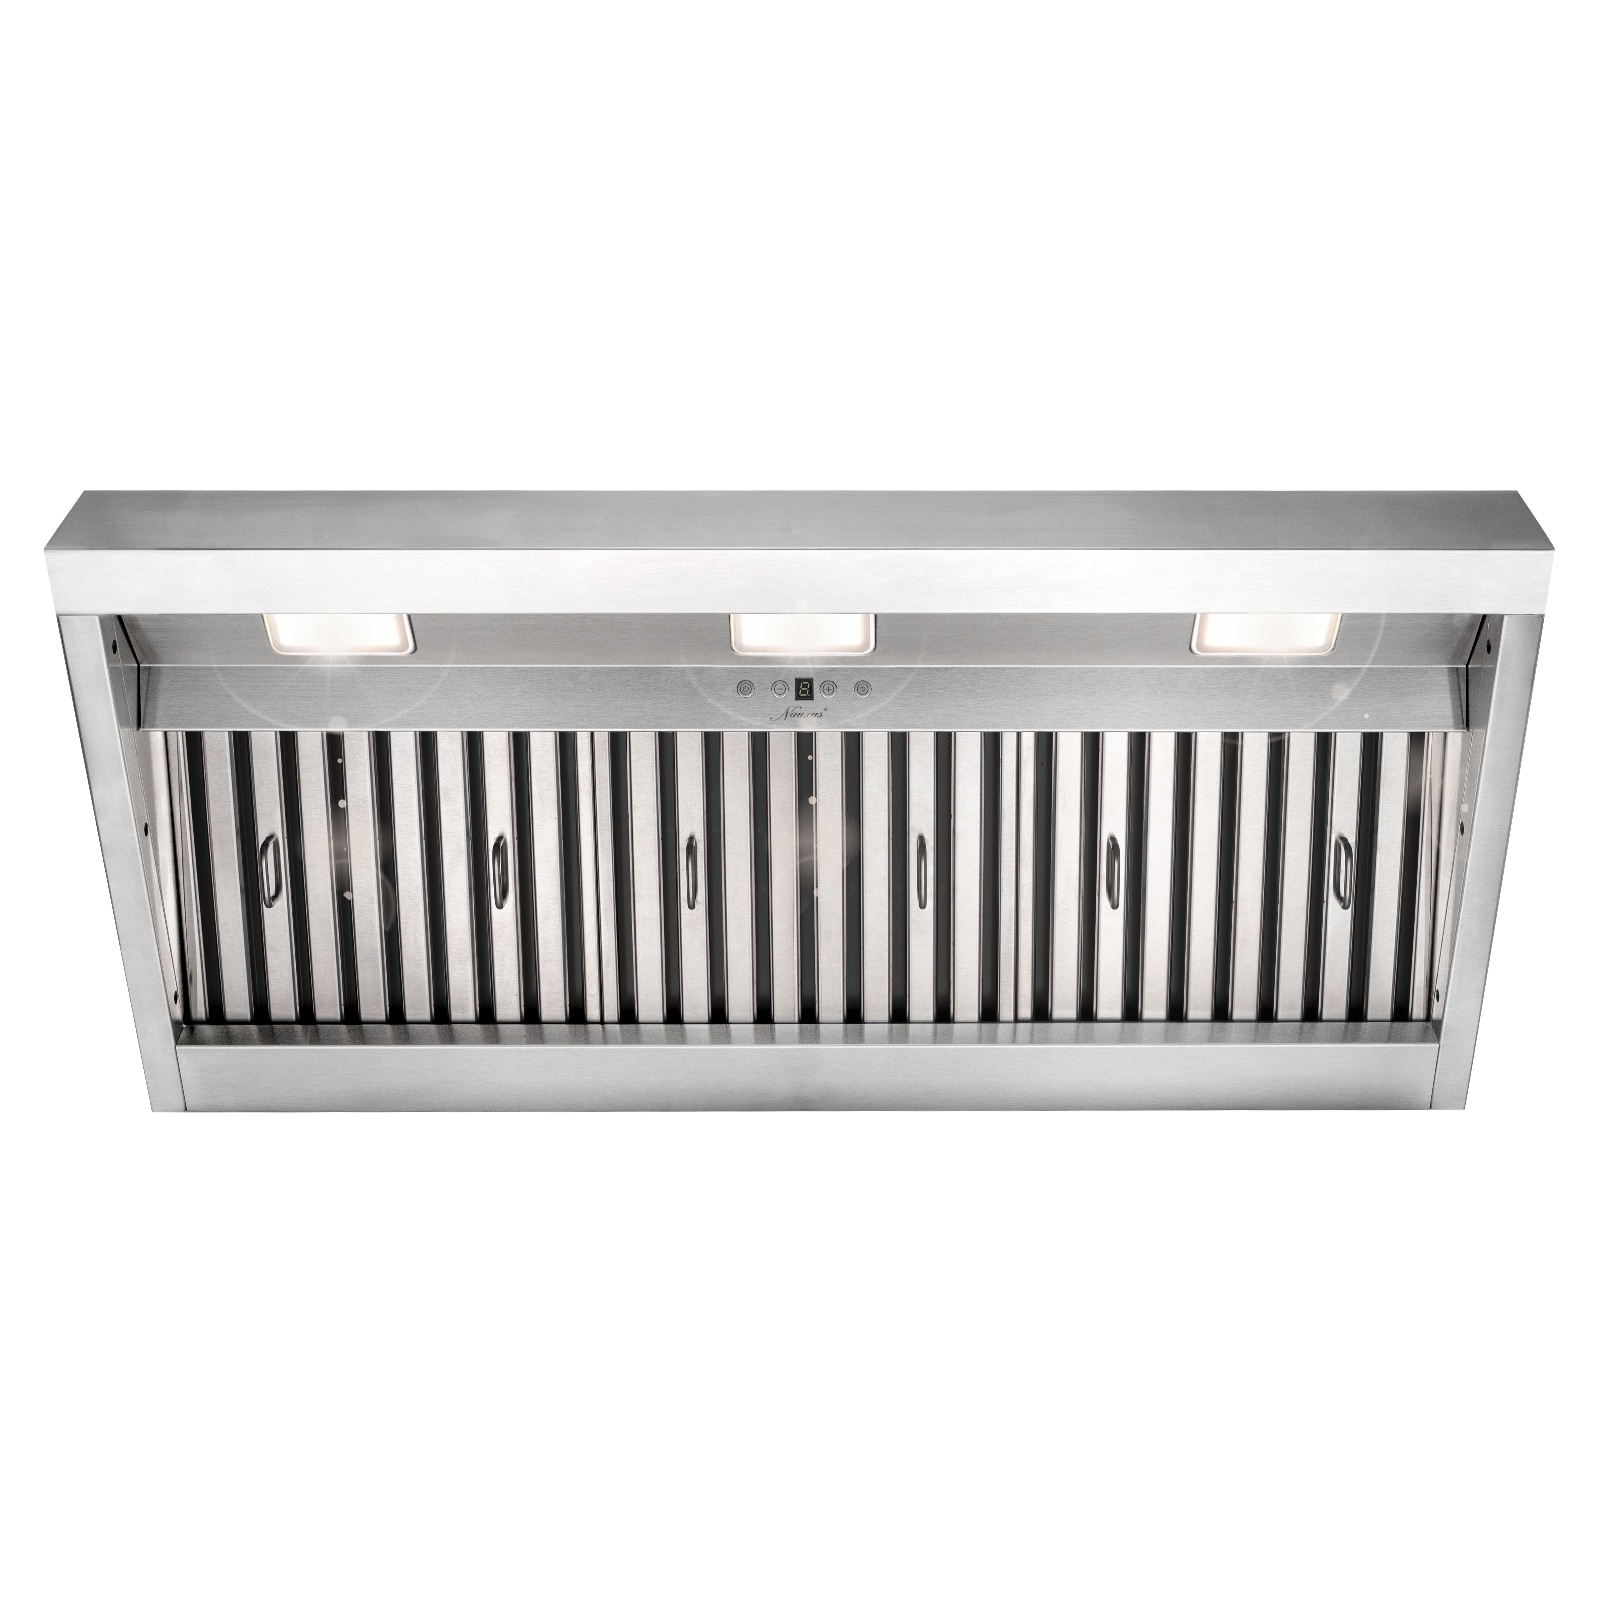 42-in 1200-CFM Ducted Stainless Steel Under Cabinet Range Hoods Insert | - Akicon NX-19IL-42-WARM